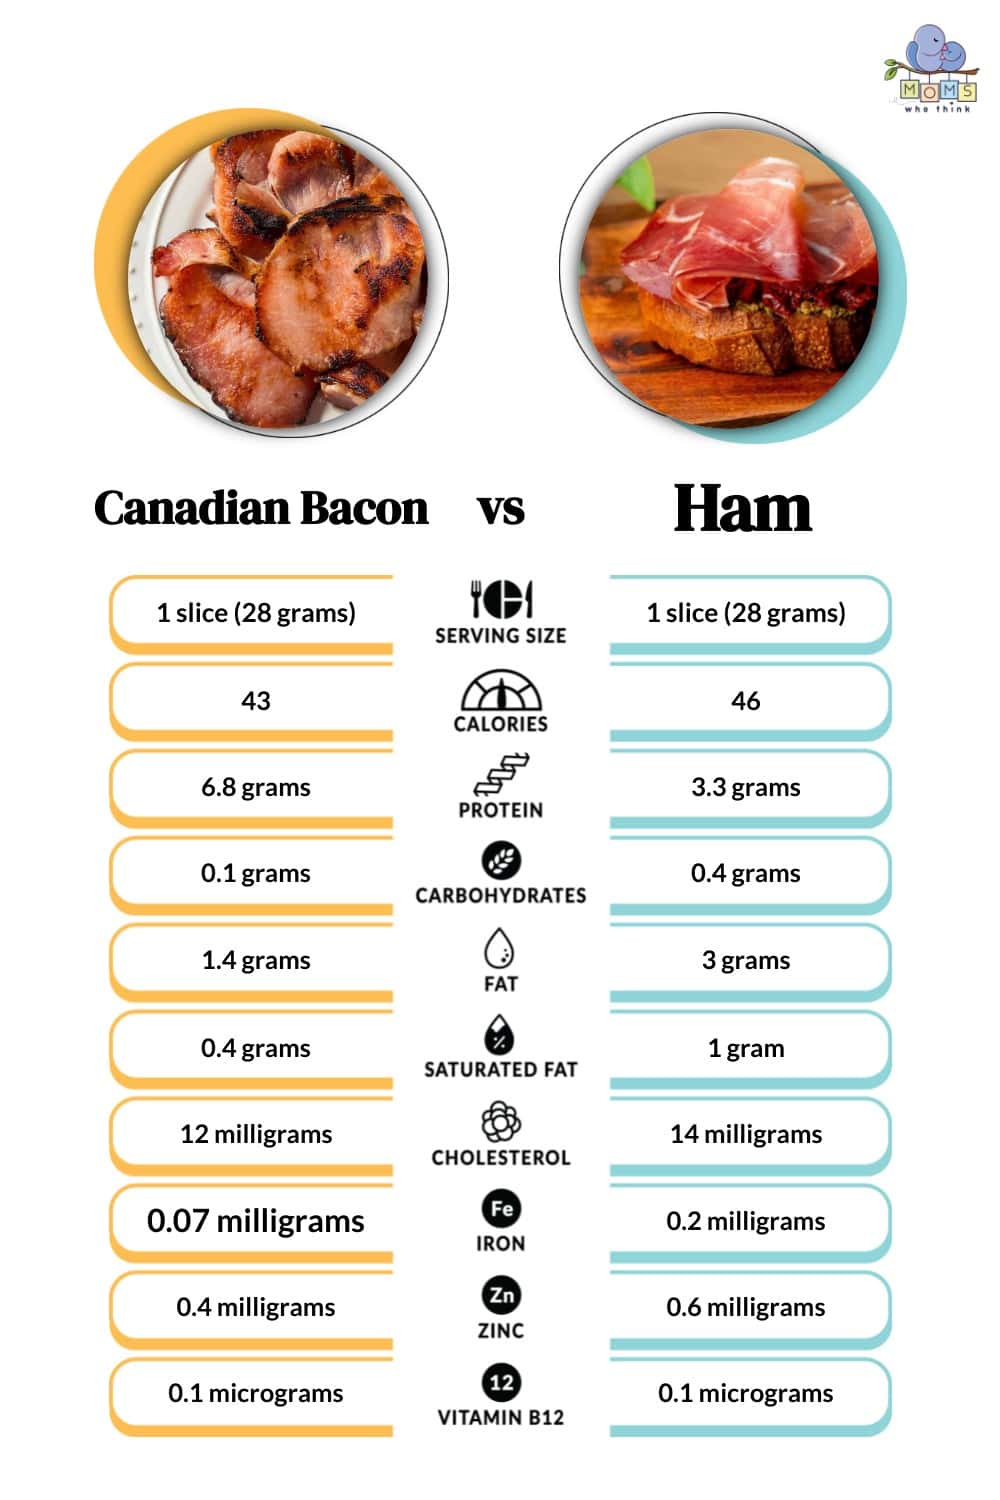 Canadian Bacon vs Ham Nutritional Facts